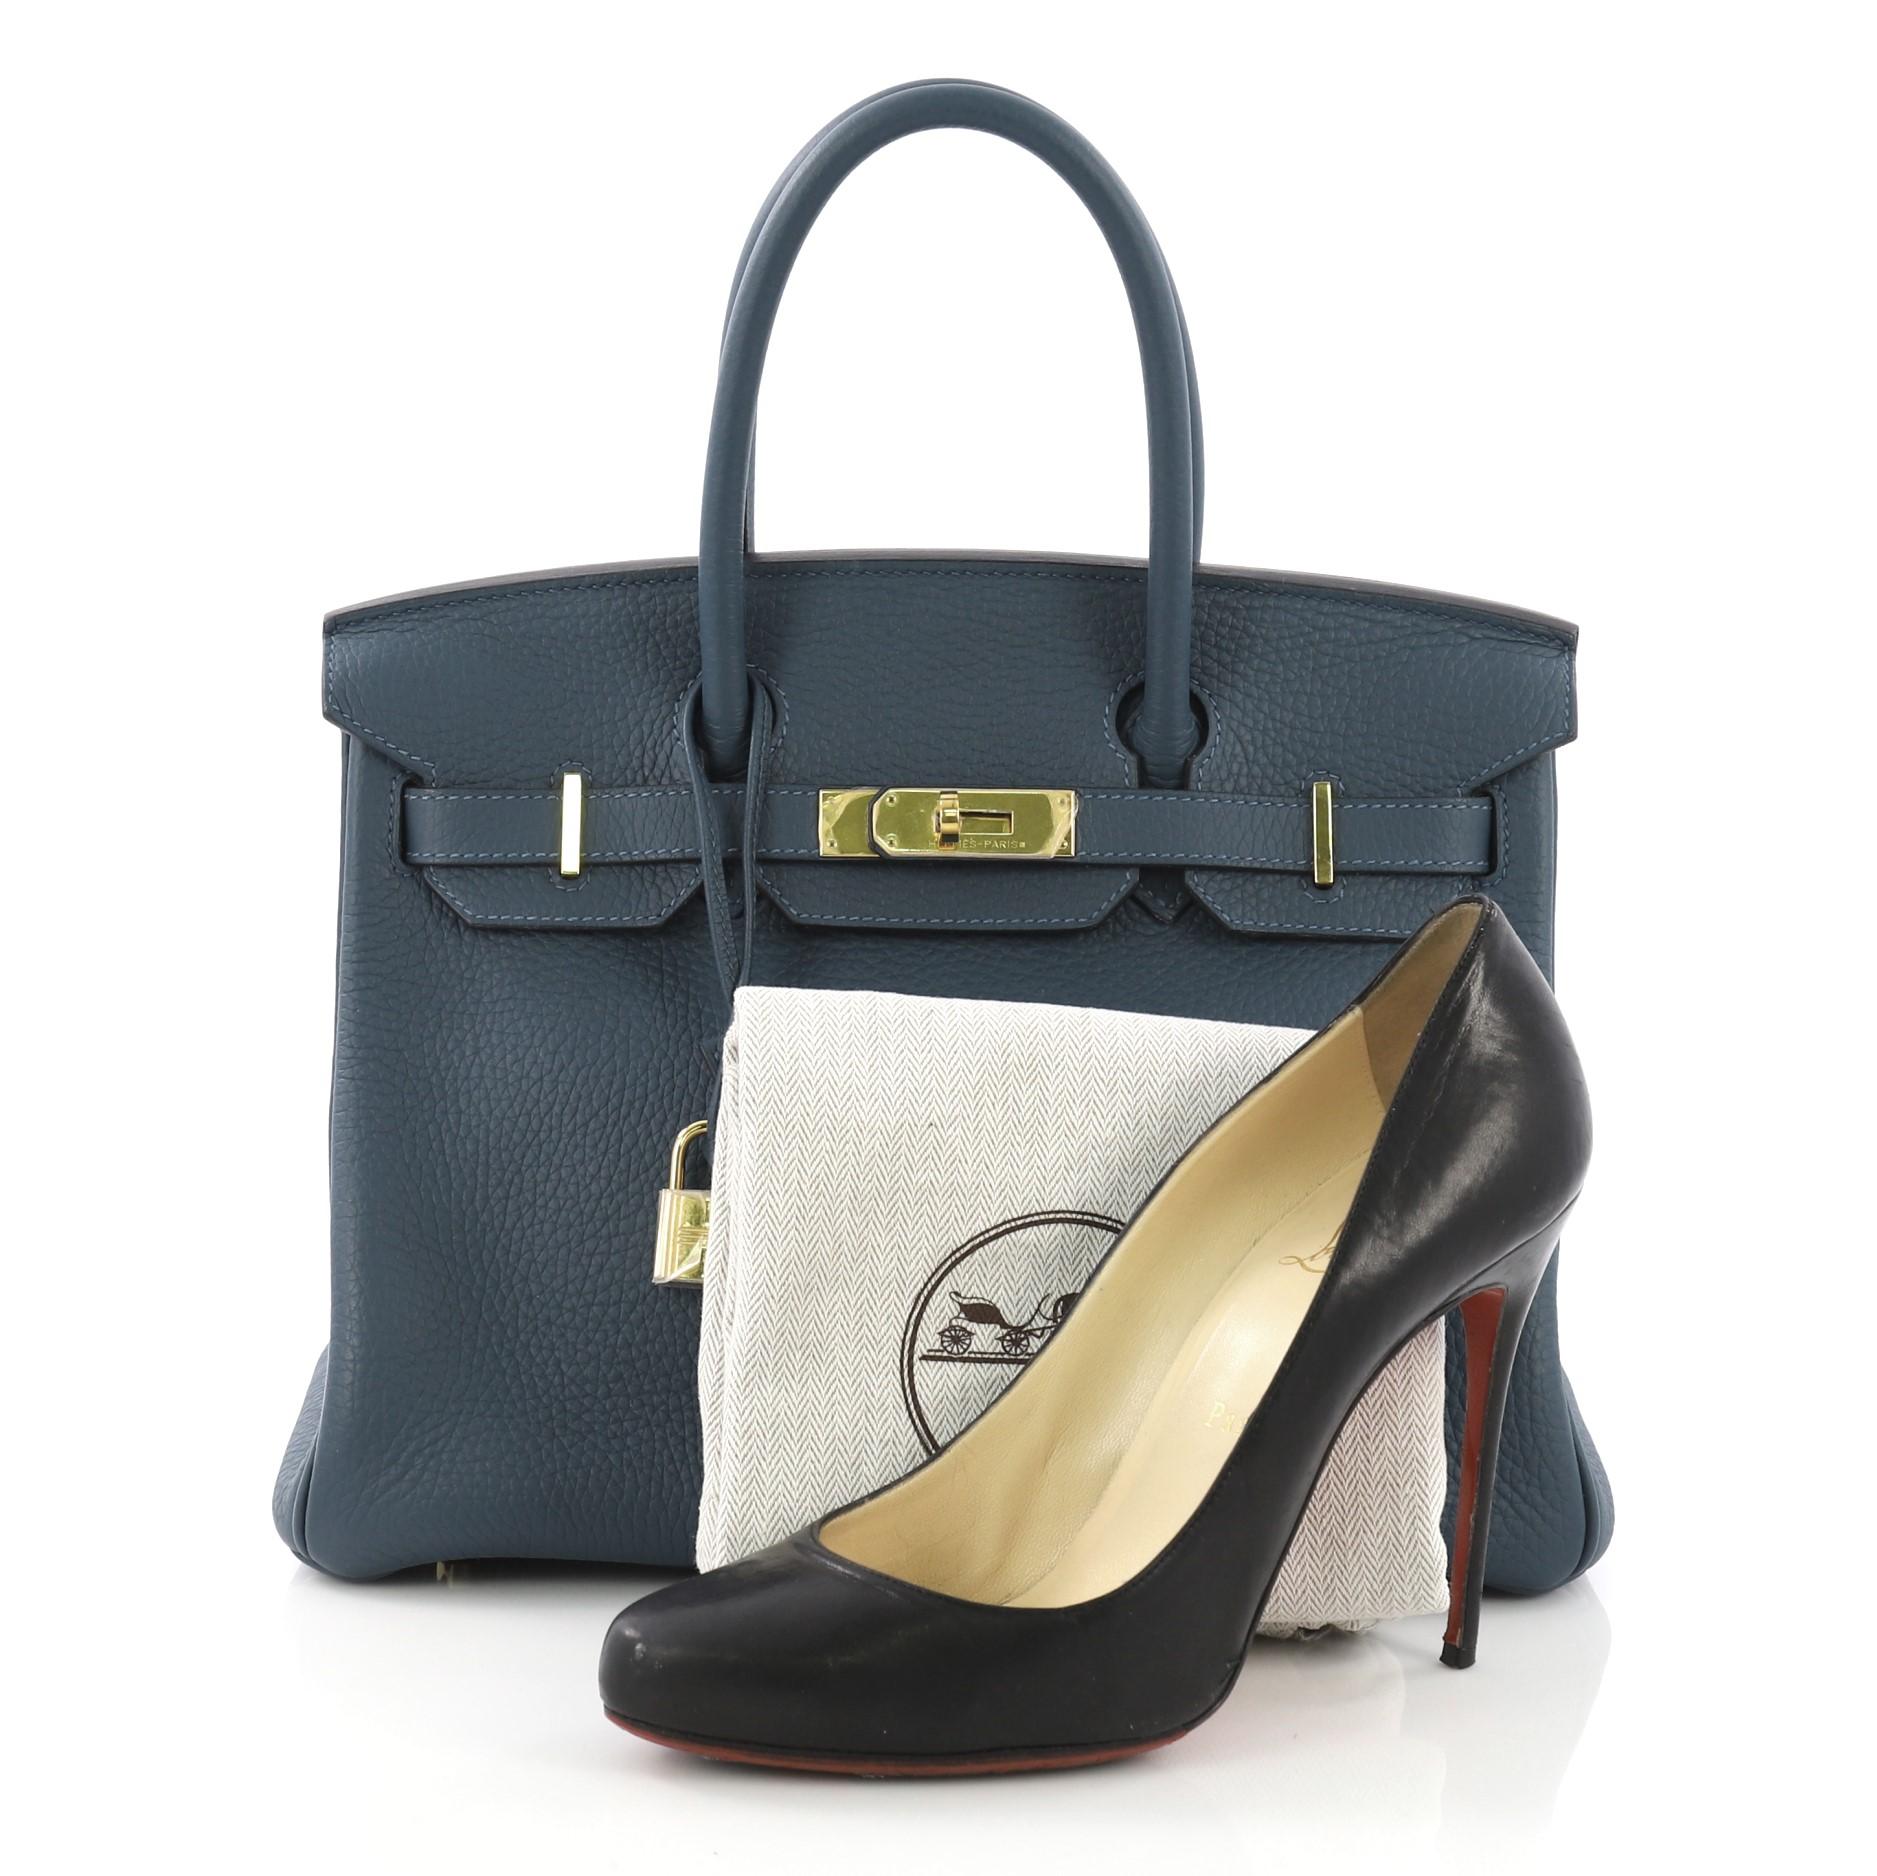 This Hermes Birkin Handbag Colvert Clemence with Gold Hardware 30, crafted in Colvert blue Clemence leather, features dual rolled handles, front flap, and gold hardware. Its turn-lock closure opens to a Colvert blue Chevre leather interior with slip